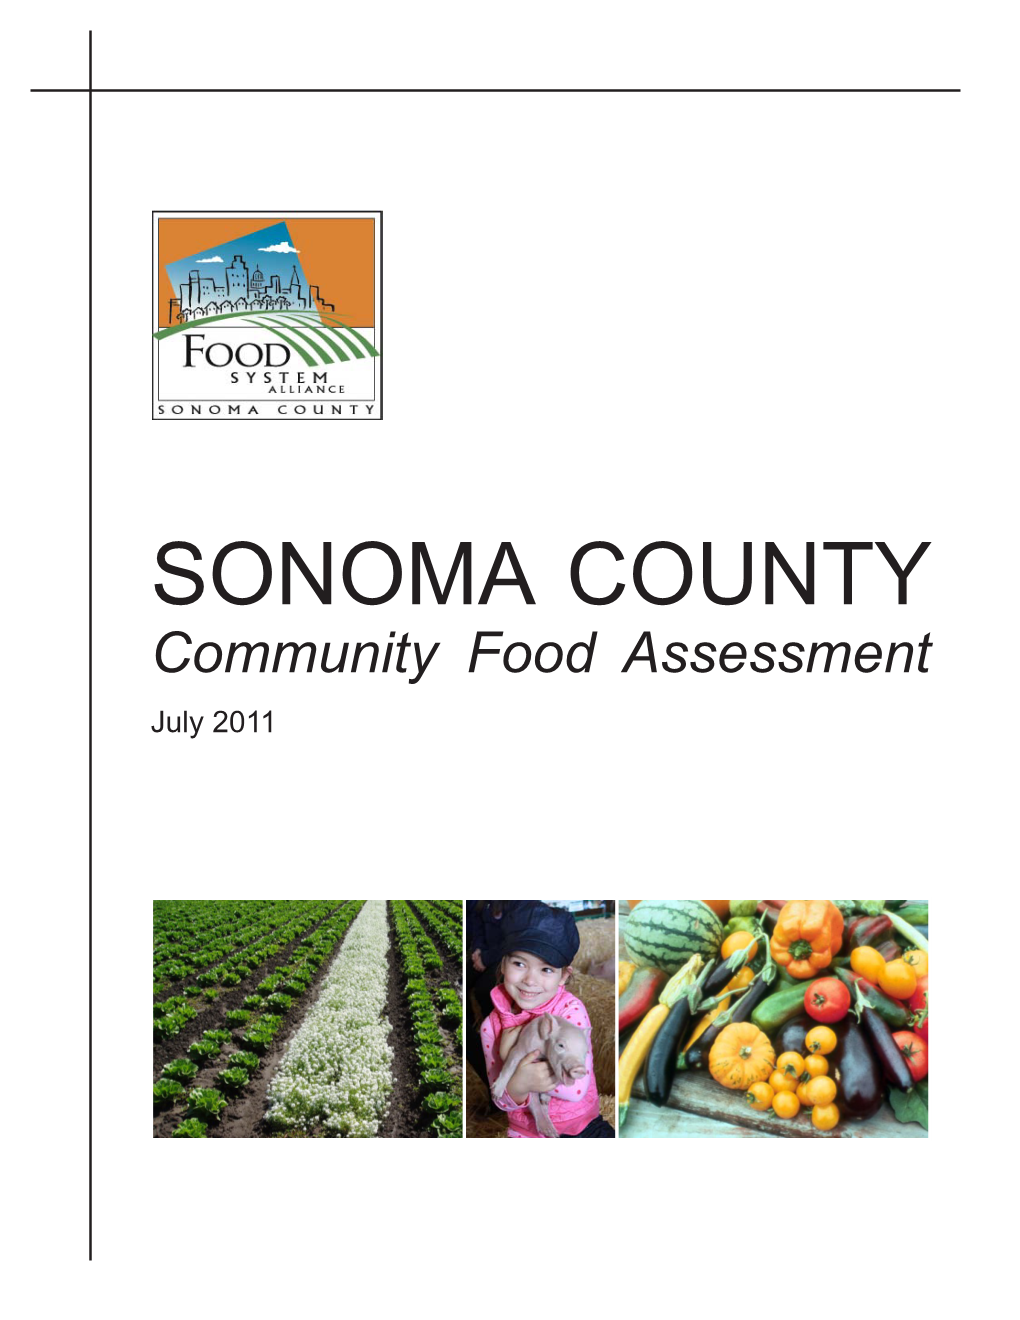 Sonoma County Human Services Department for Creation of the Maps Depicting Access to Grocery Stores, Farmers’ Markets, and Community Gardens in Sonoma County